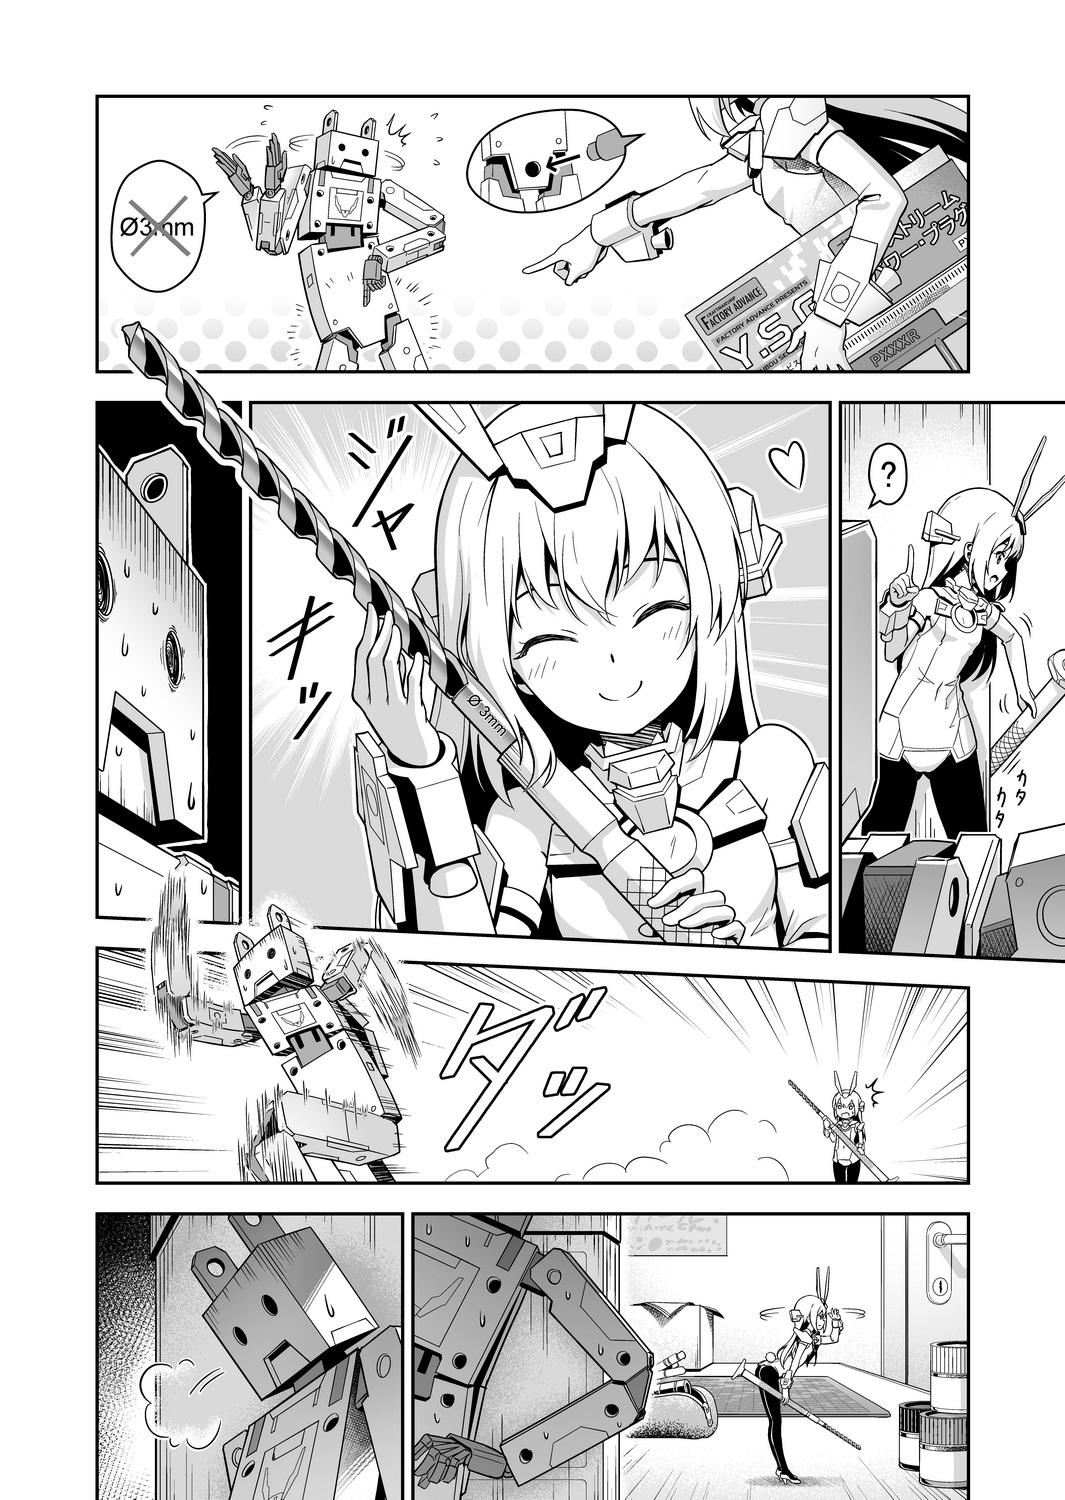 Leaked Base, Juuden Shitai! - Frame arms girl Amatuer Sex - Page 5